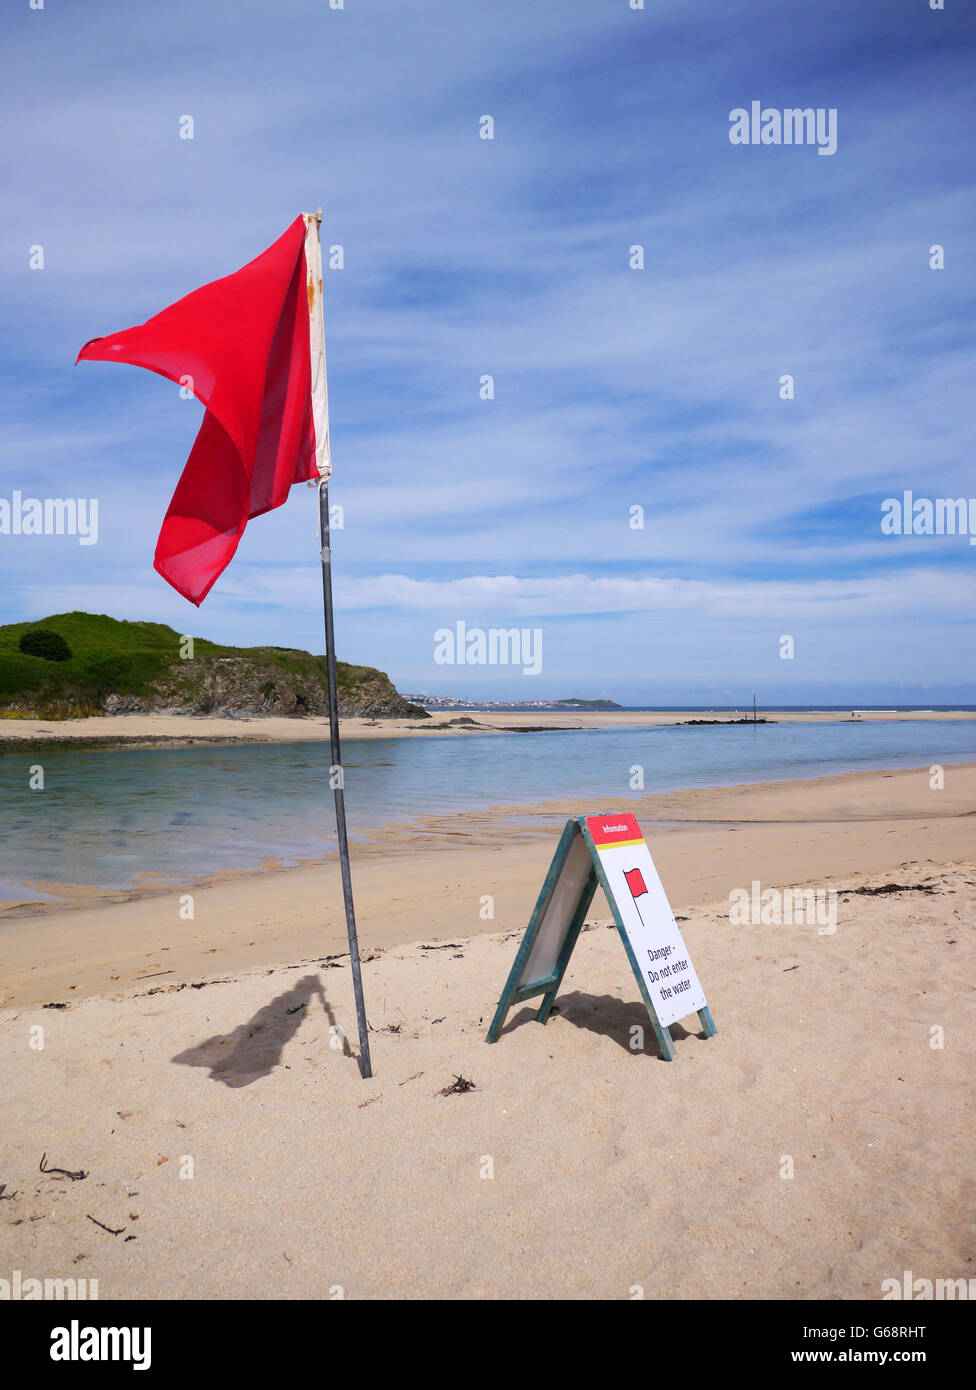 Red warning flag flying on beach Stock Photo